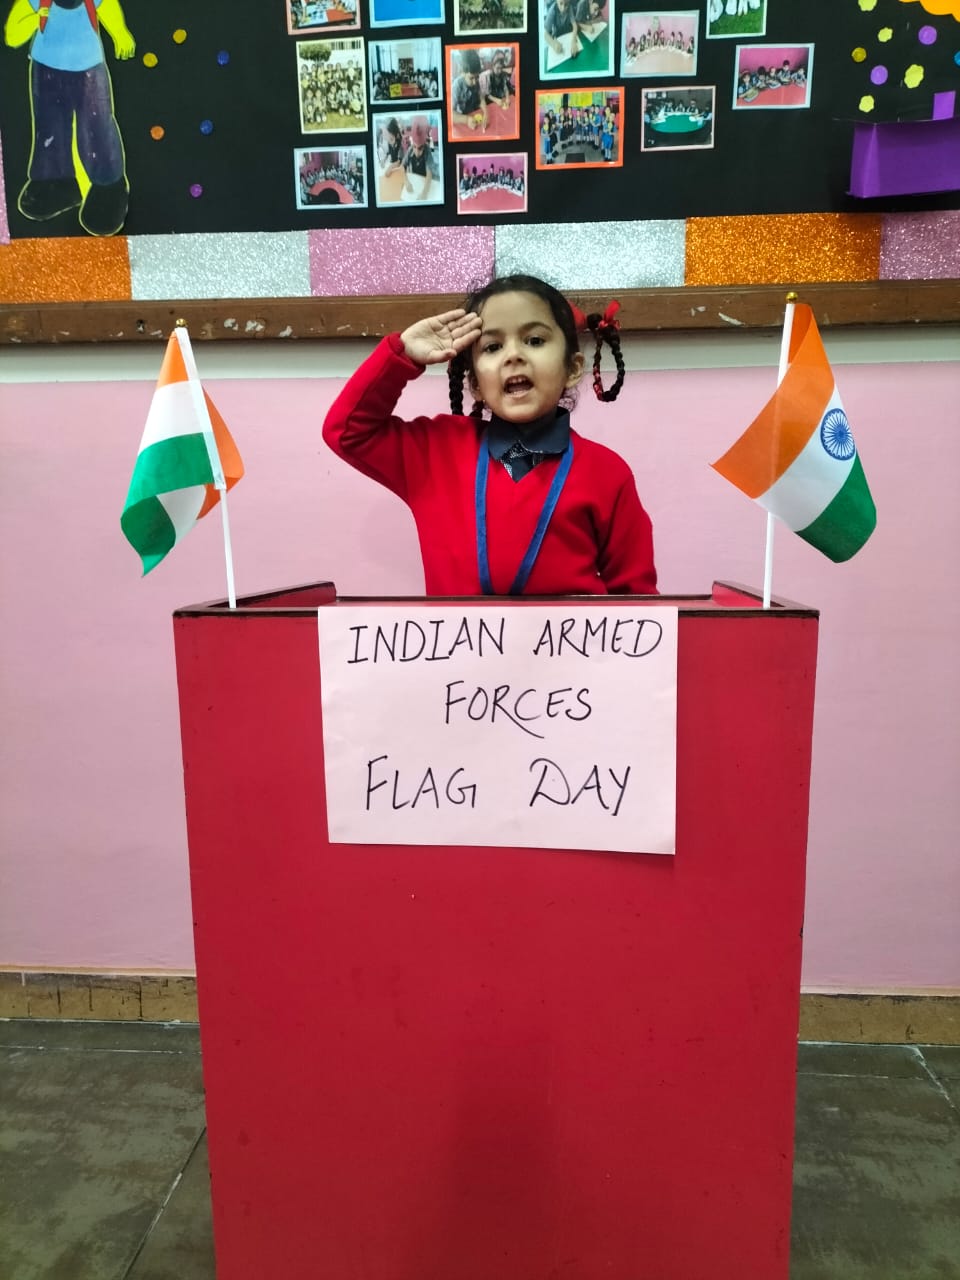 INDIAN ARMED FORCES FLAG DAY 